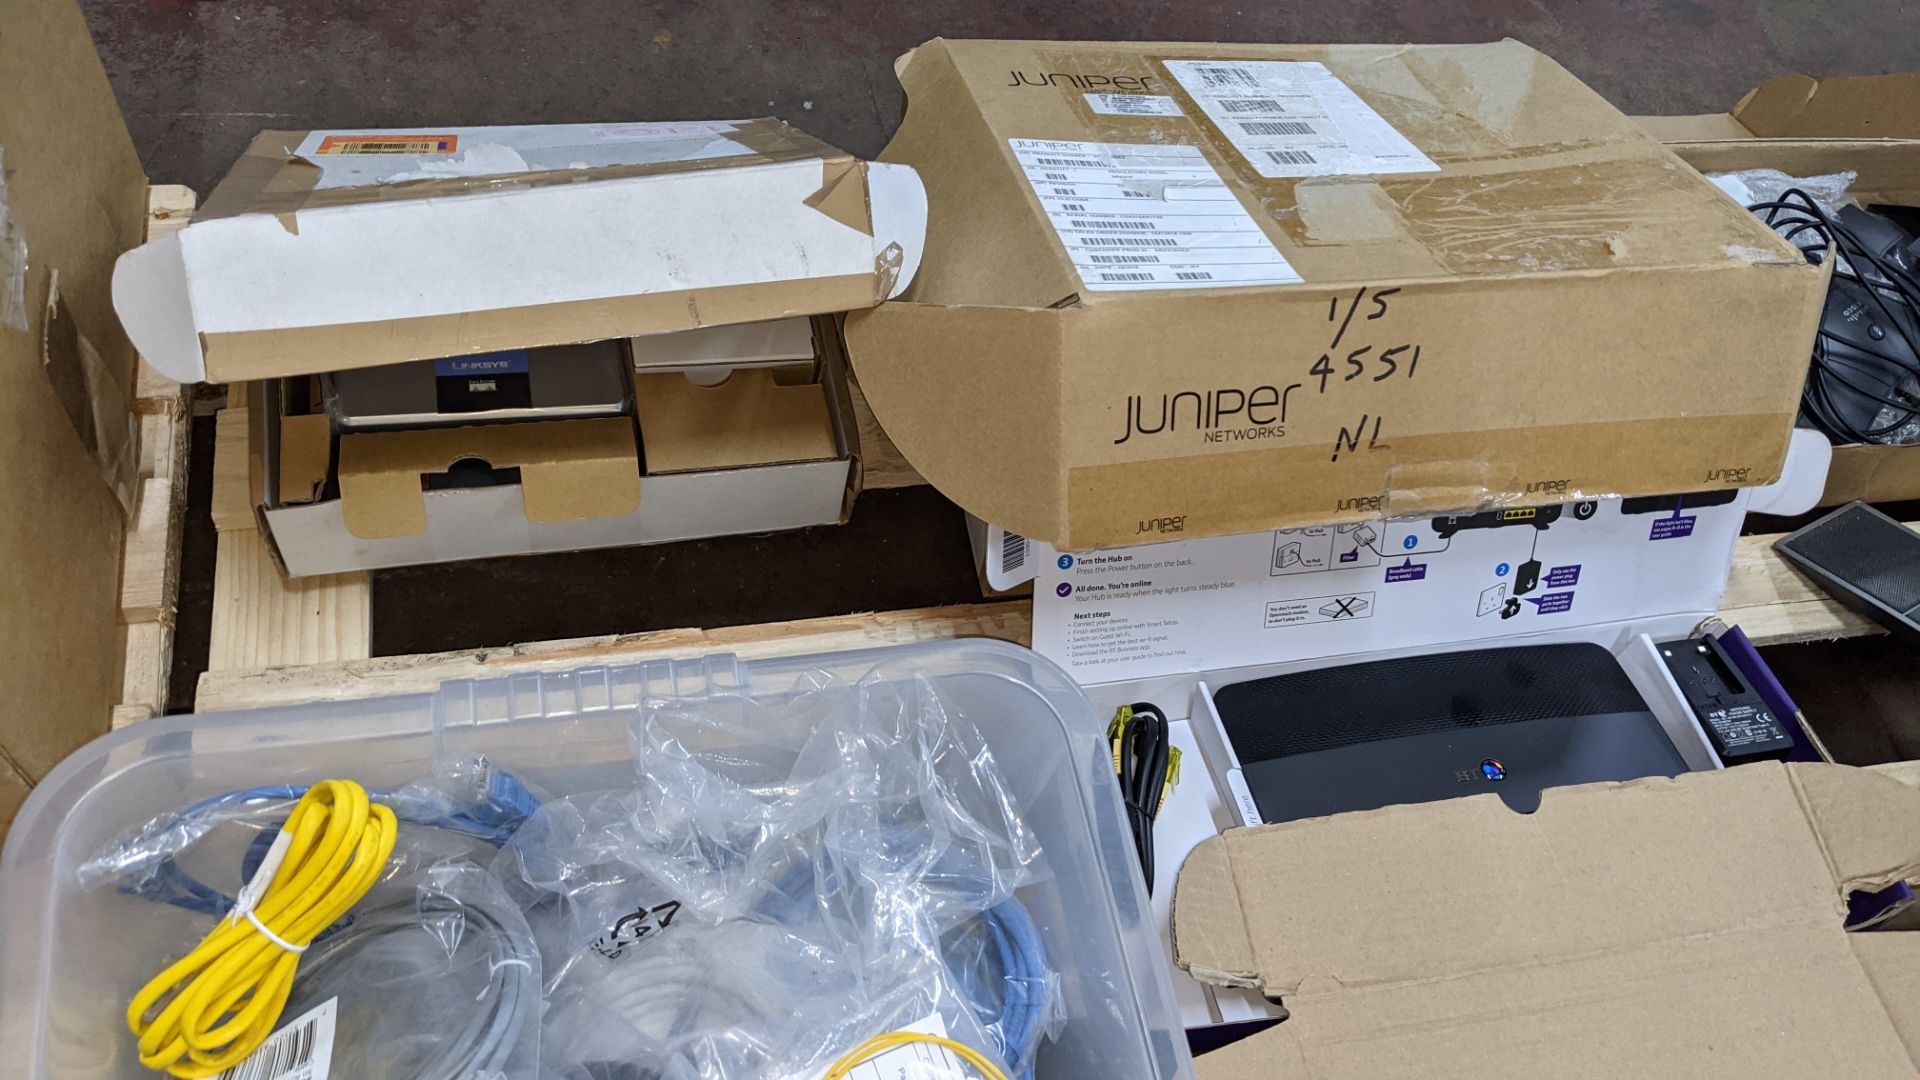 Contents of a pallet of assorted communications items including conference phones, cables, routers & - Image 4 of 9